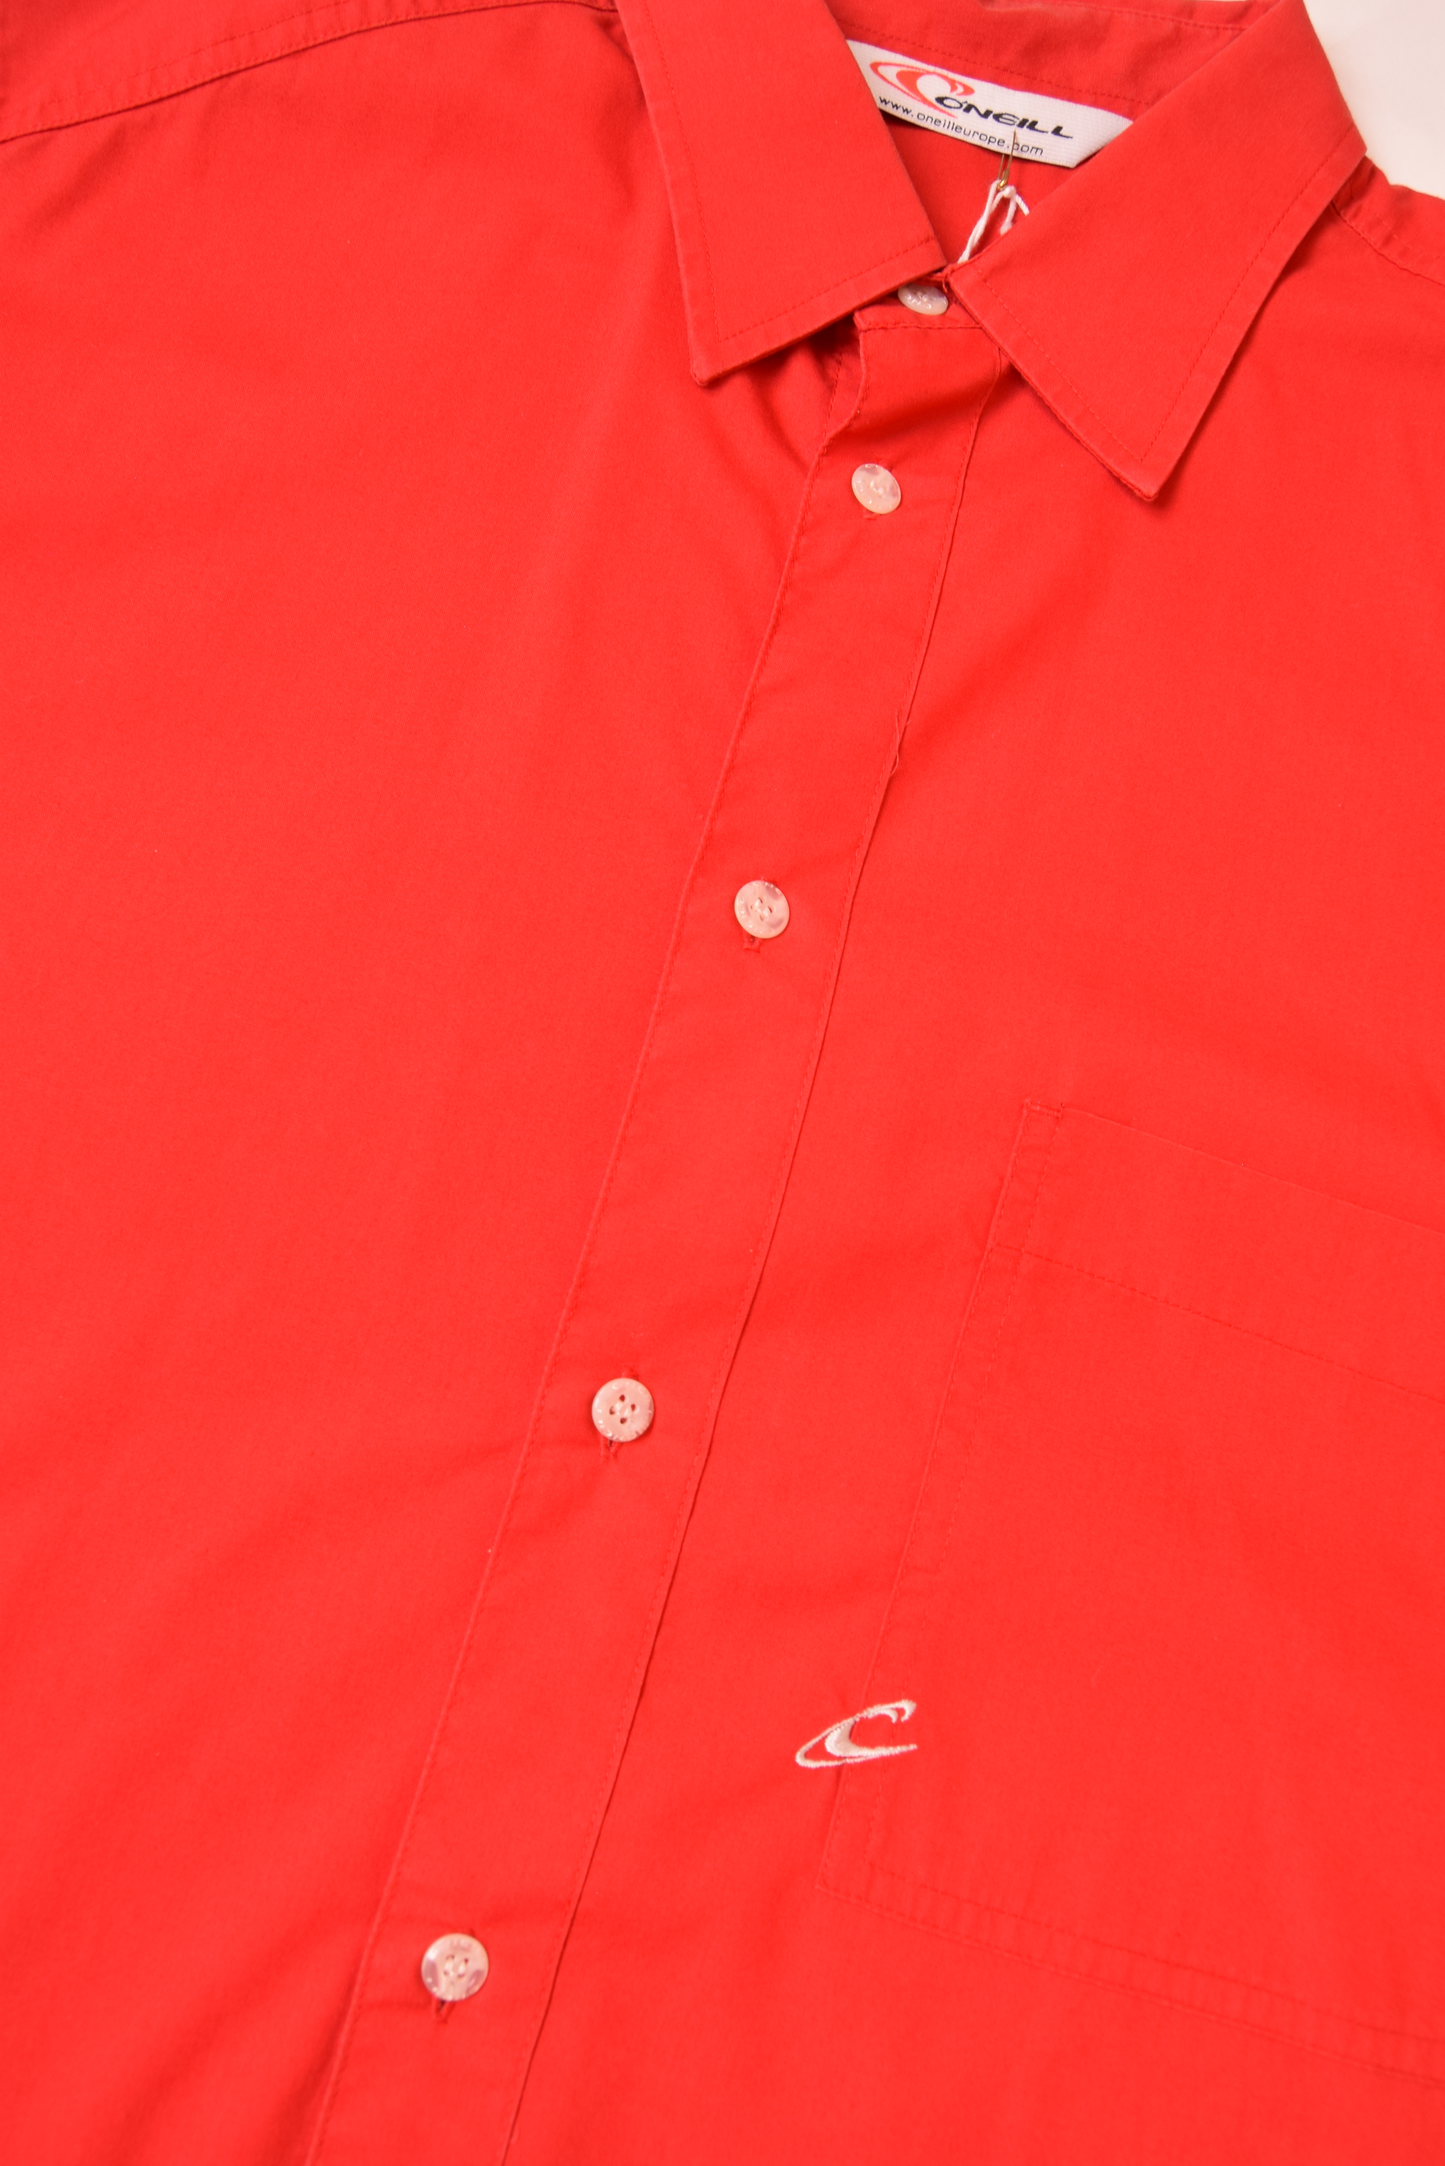 Vintage O'neill Shirt Red Size M